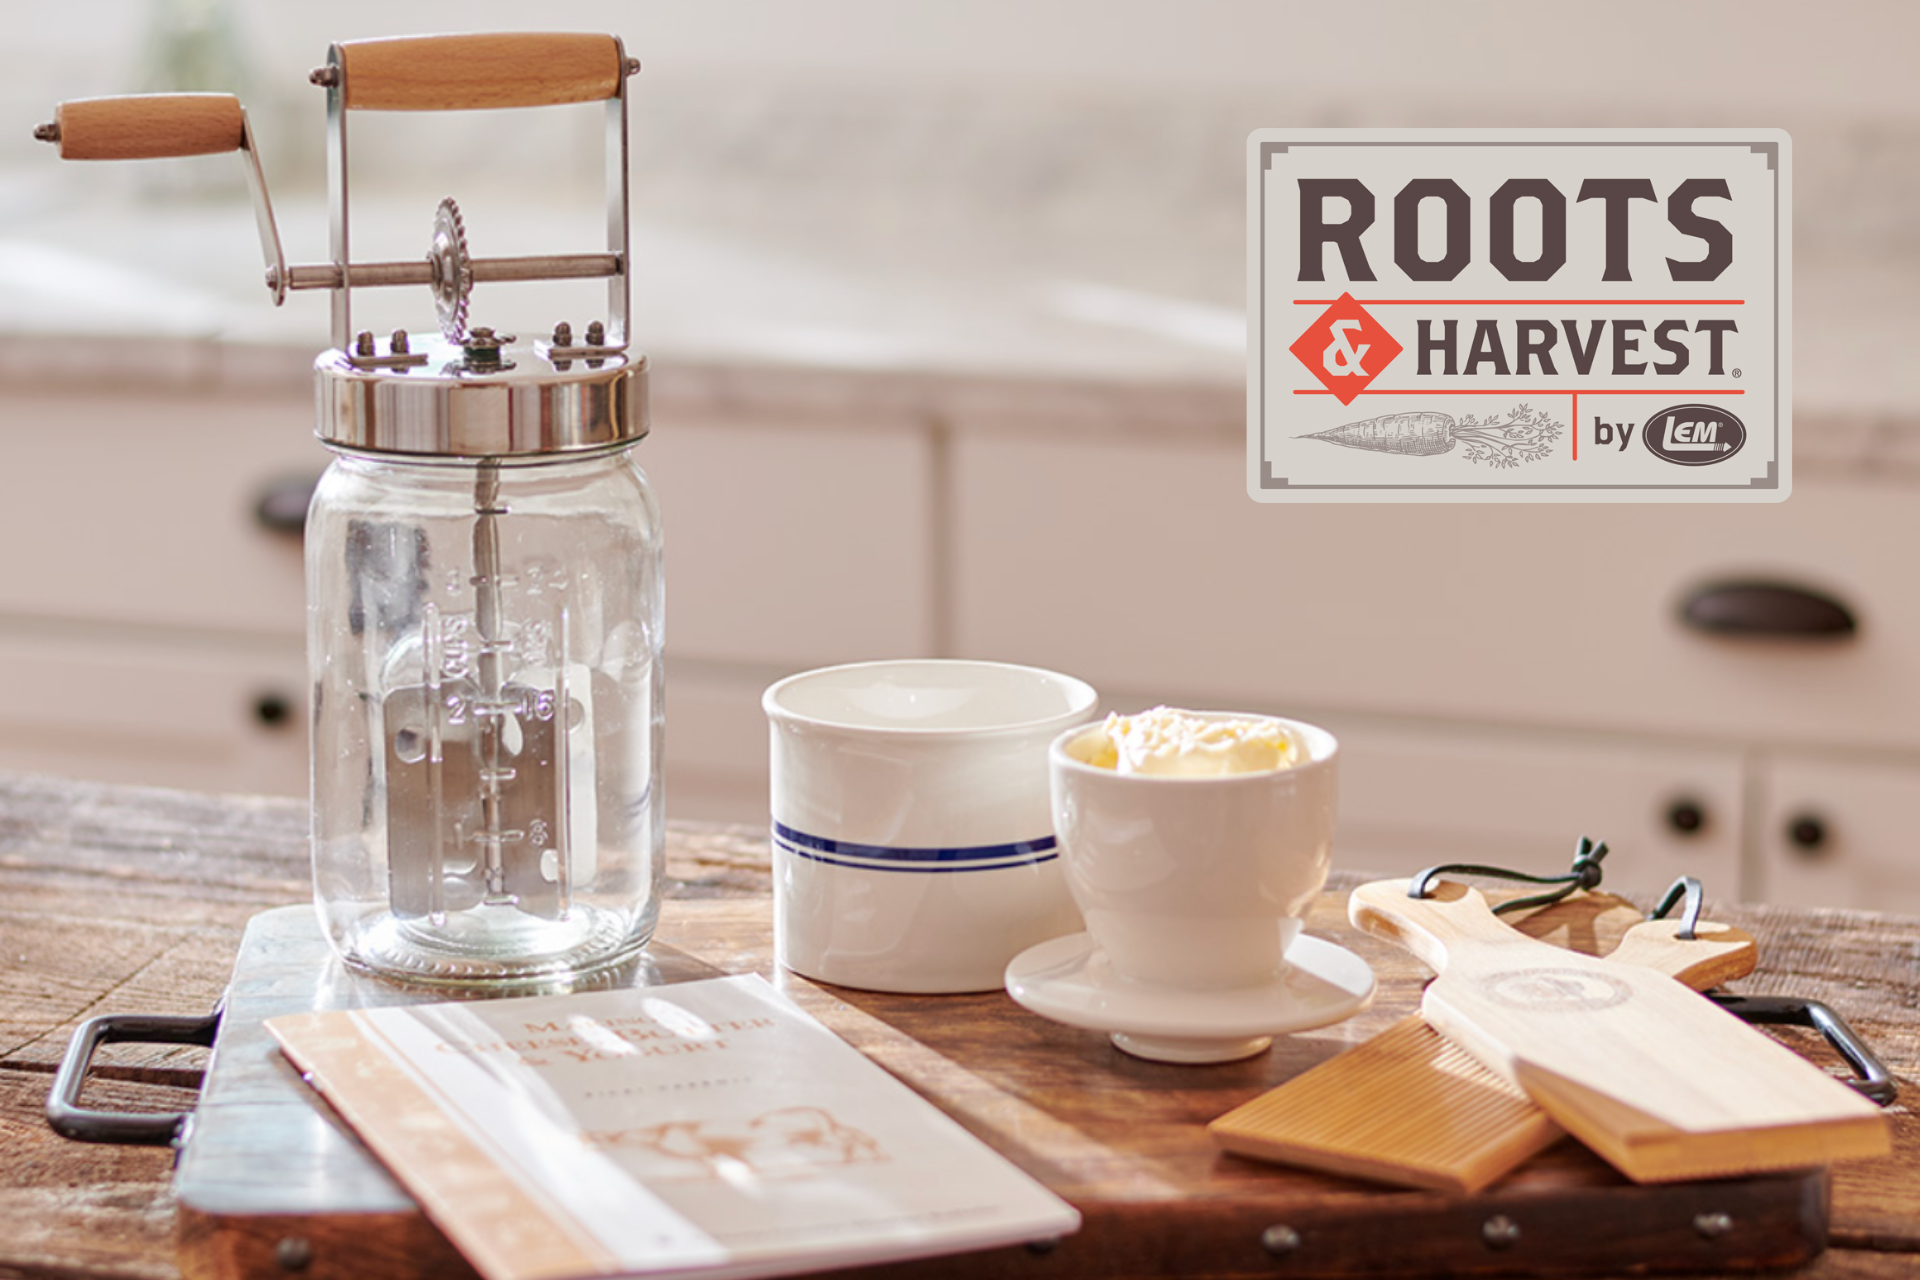 a mason jar butter churn kit with a roots and harvest logo